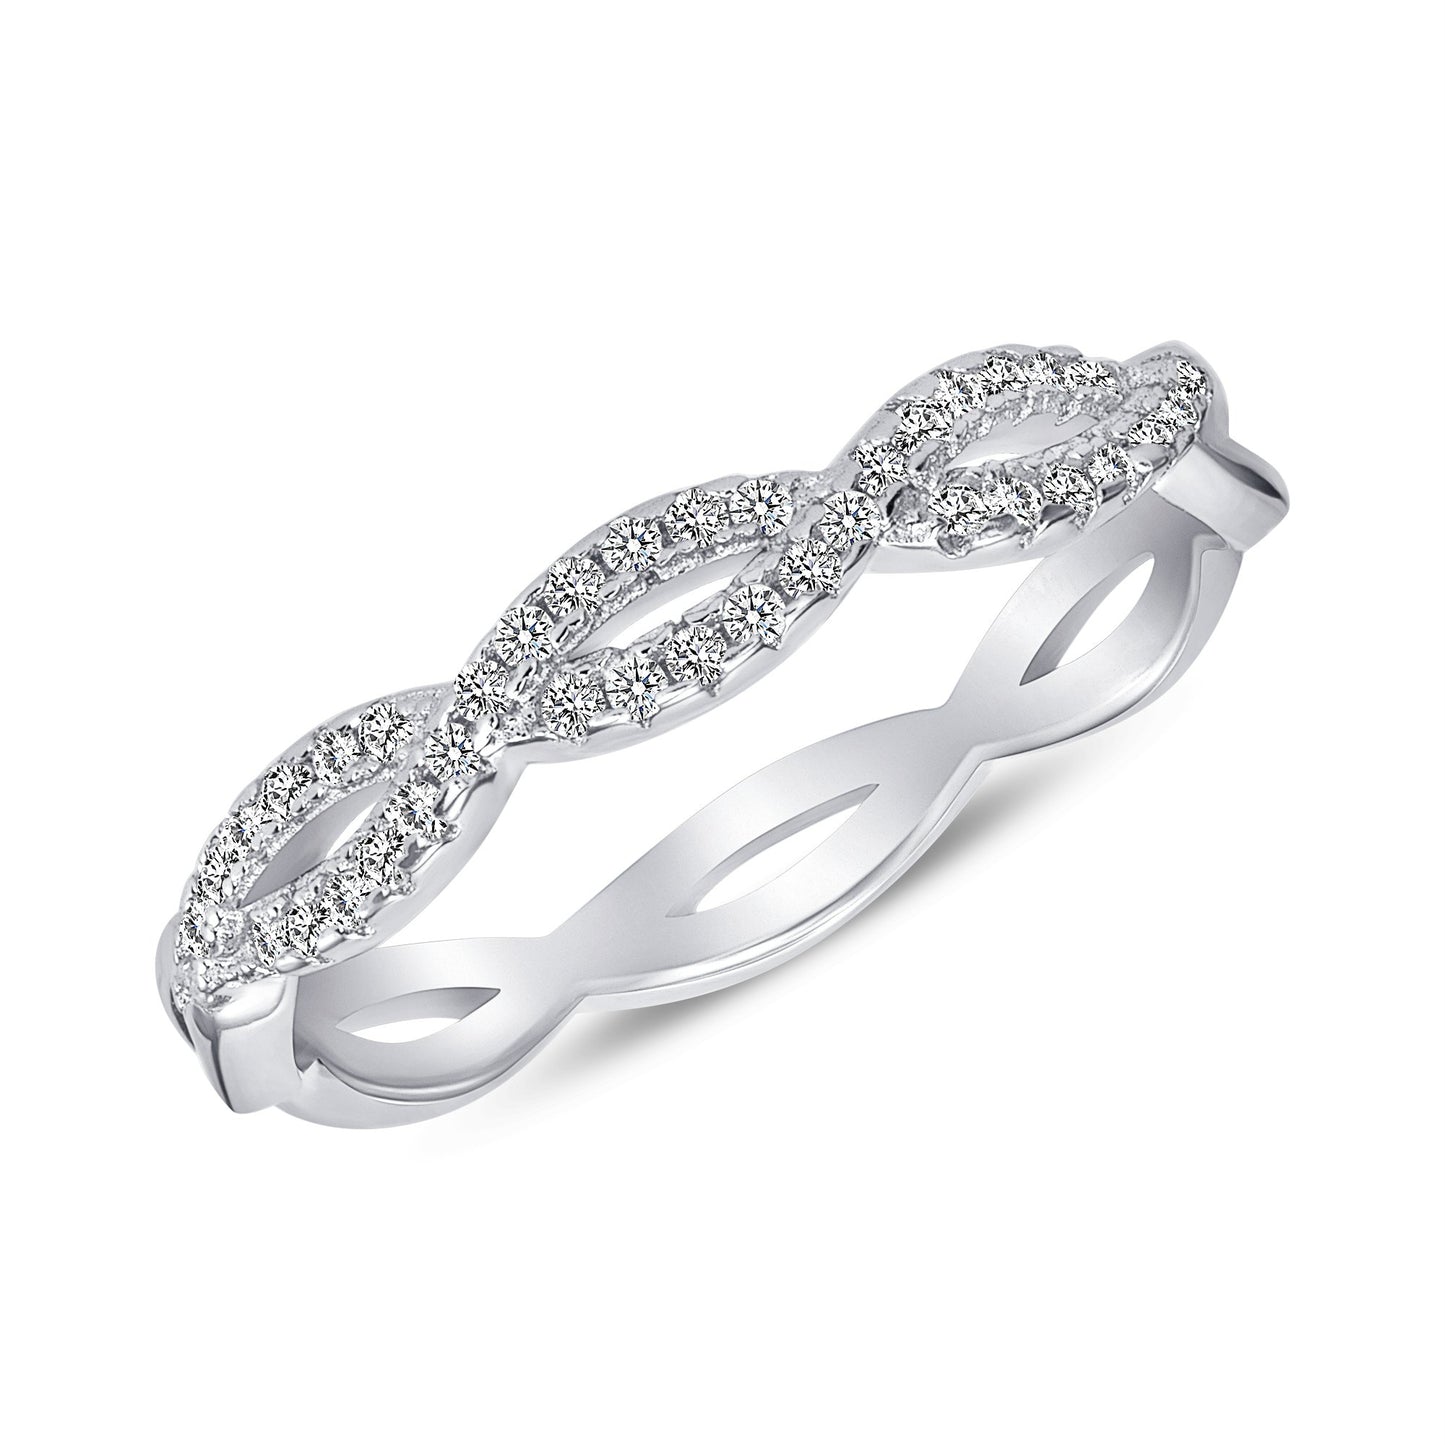 Silver 925 Rhodium Plated Infinity Band Ring. GR9636